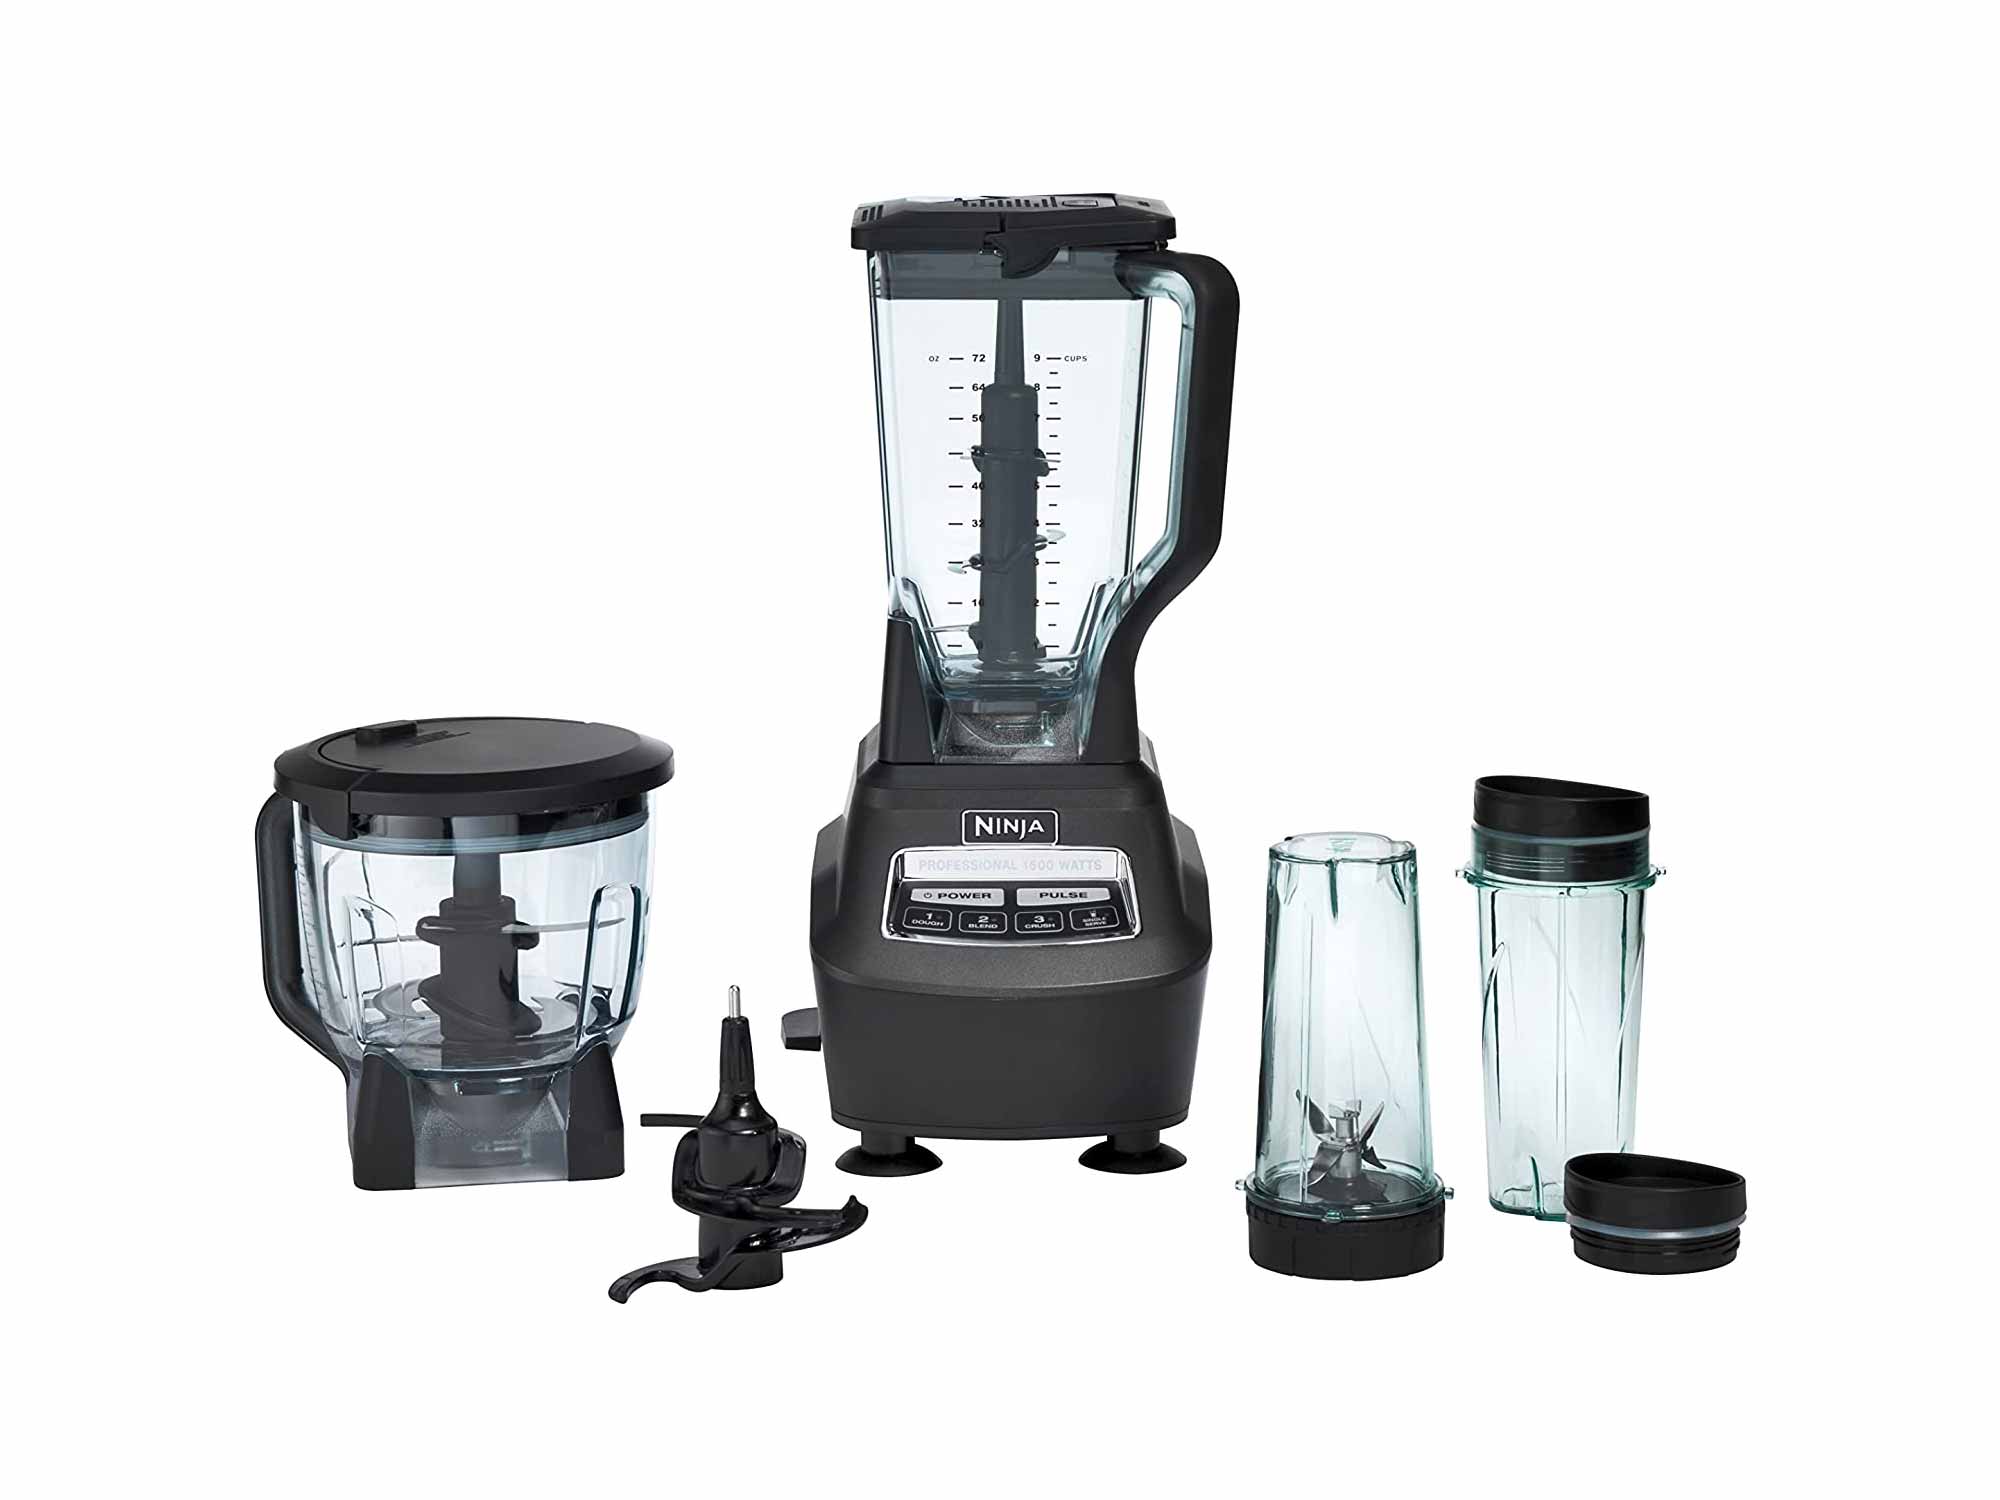 Ninja Mega Kitchen System and Blender with Total Crushing Pitcher, Food Processor Bowl, Dough Blade, To Go Cups, 1500-Watt Base, Black